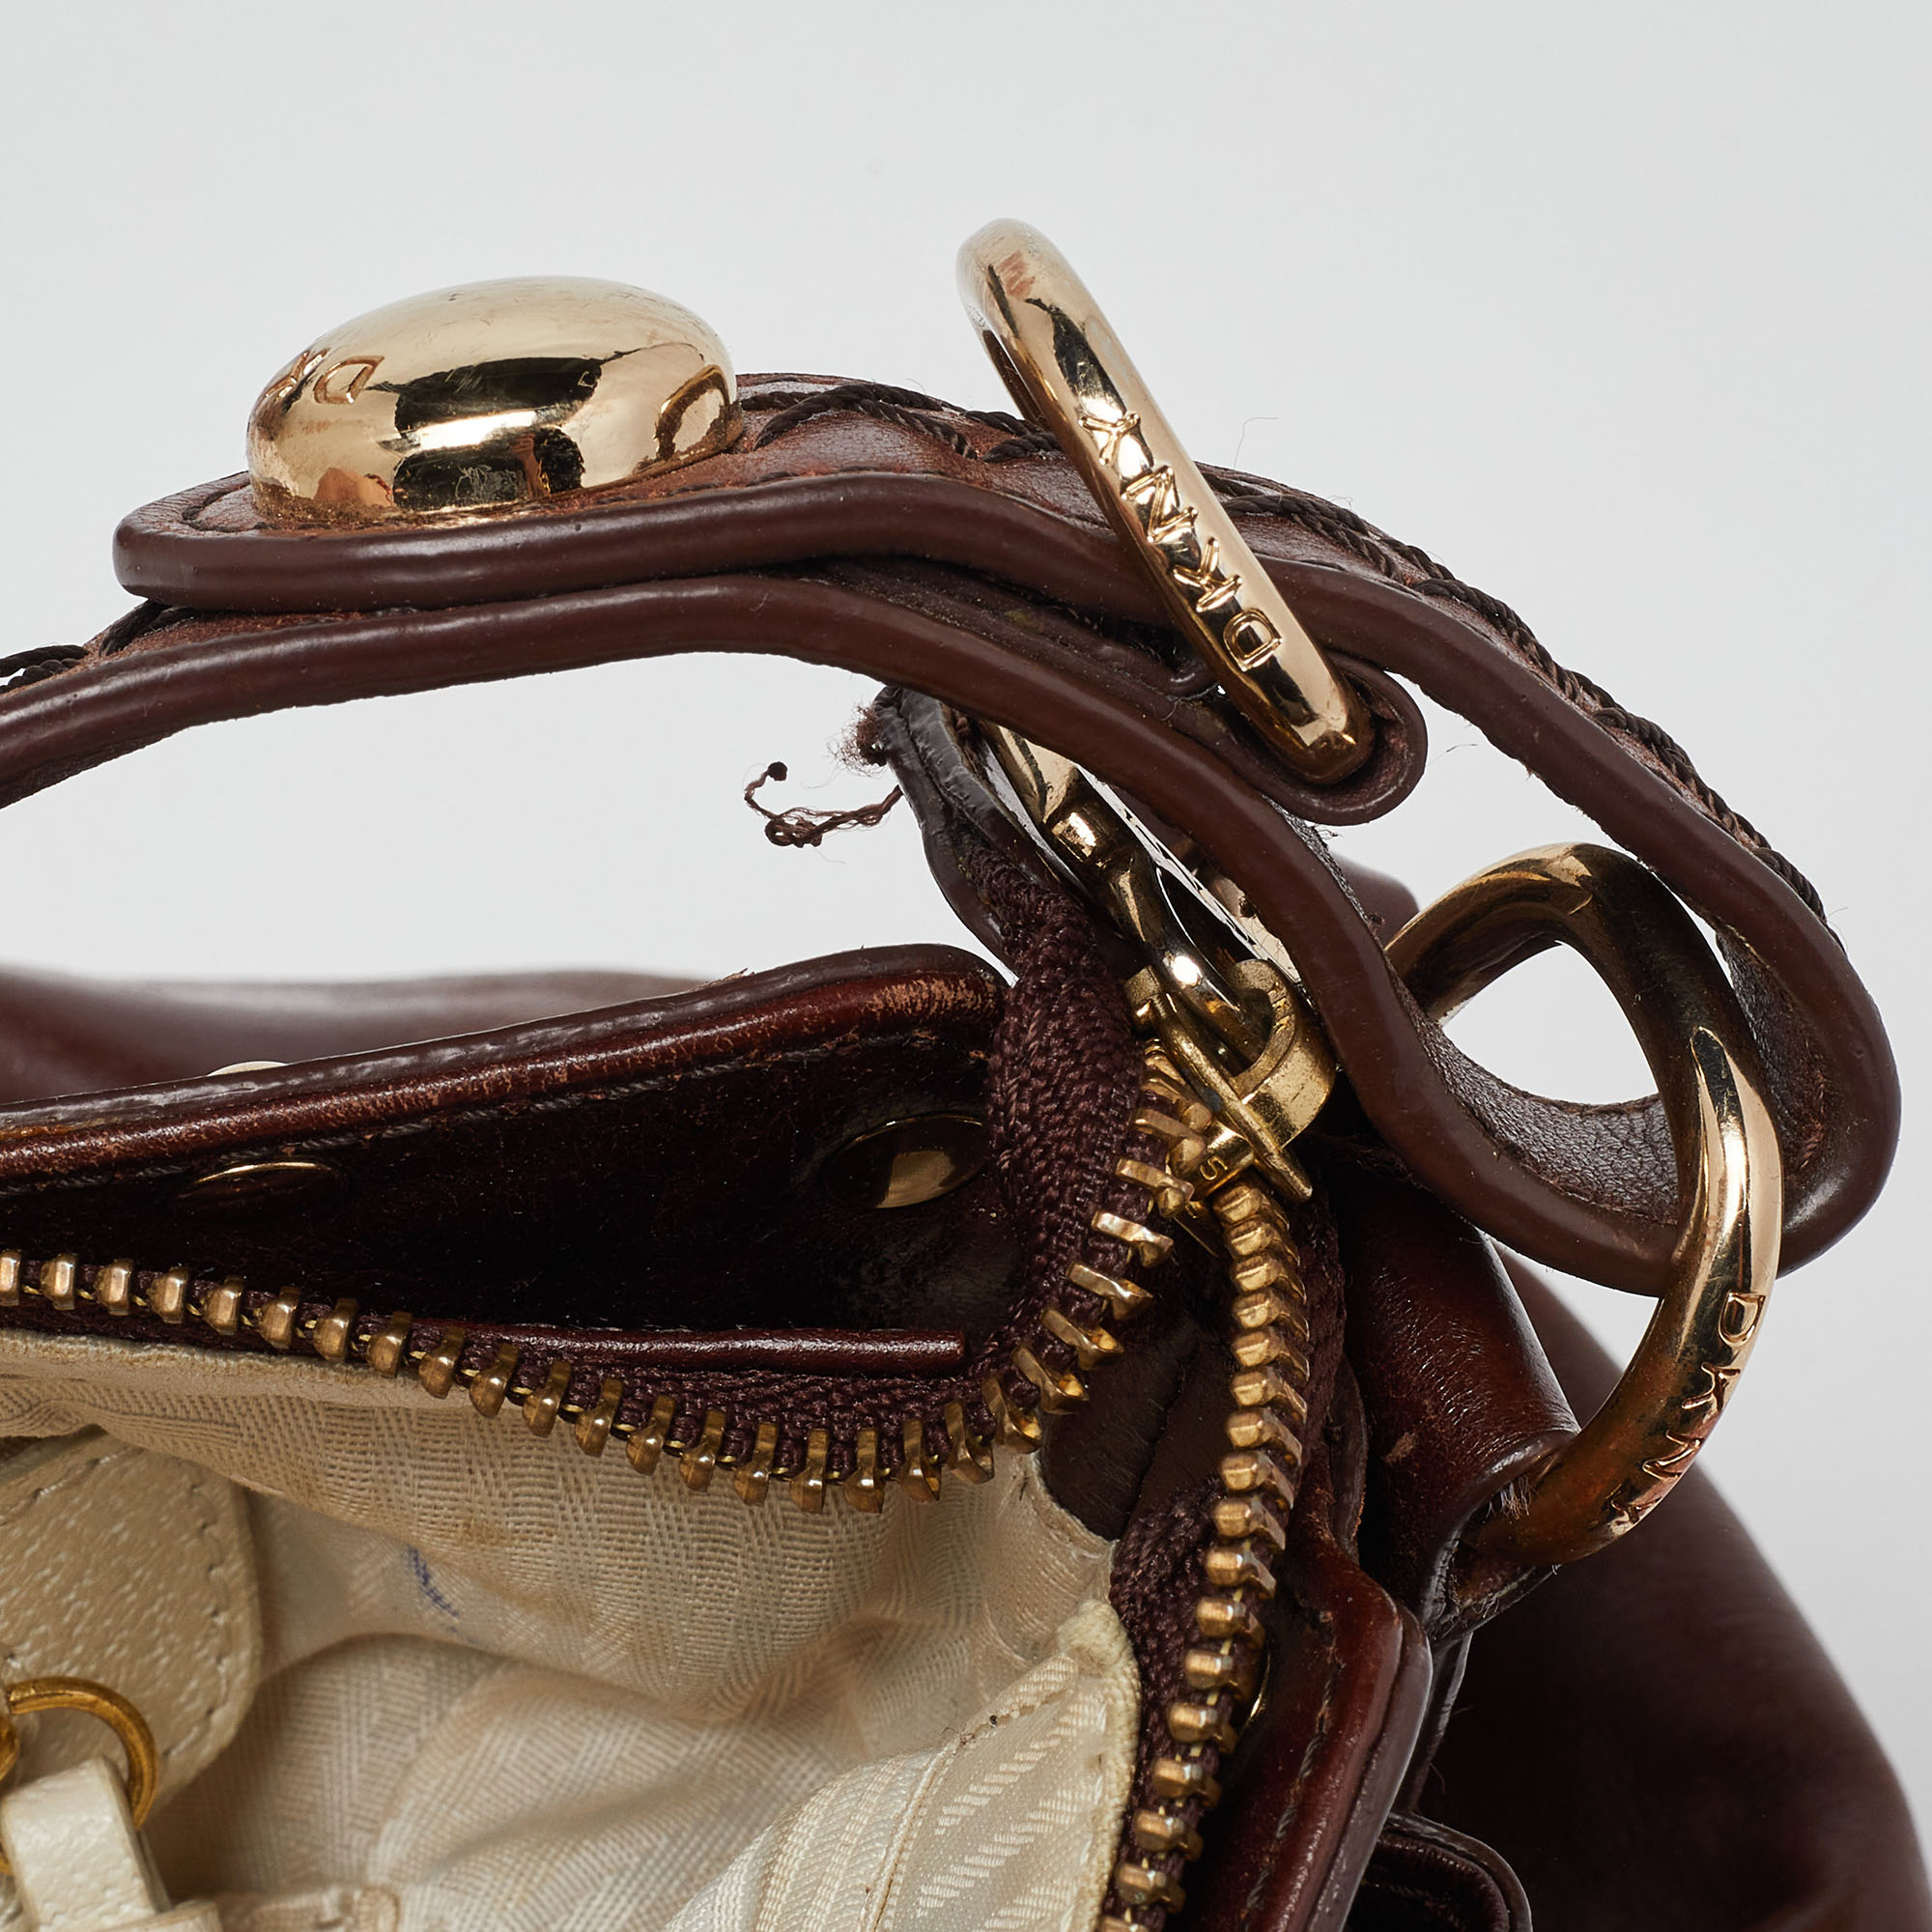 DKNY Brown Leather Studded Hobo